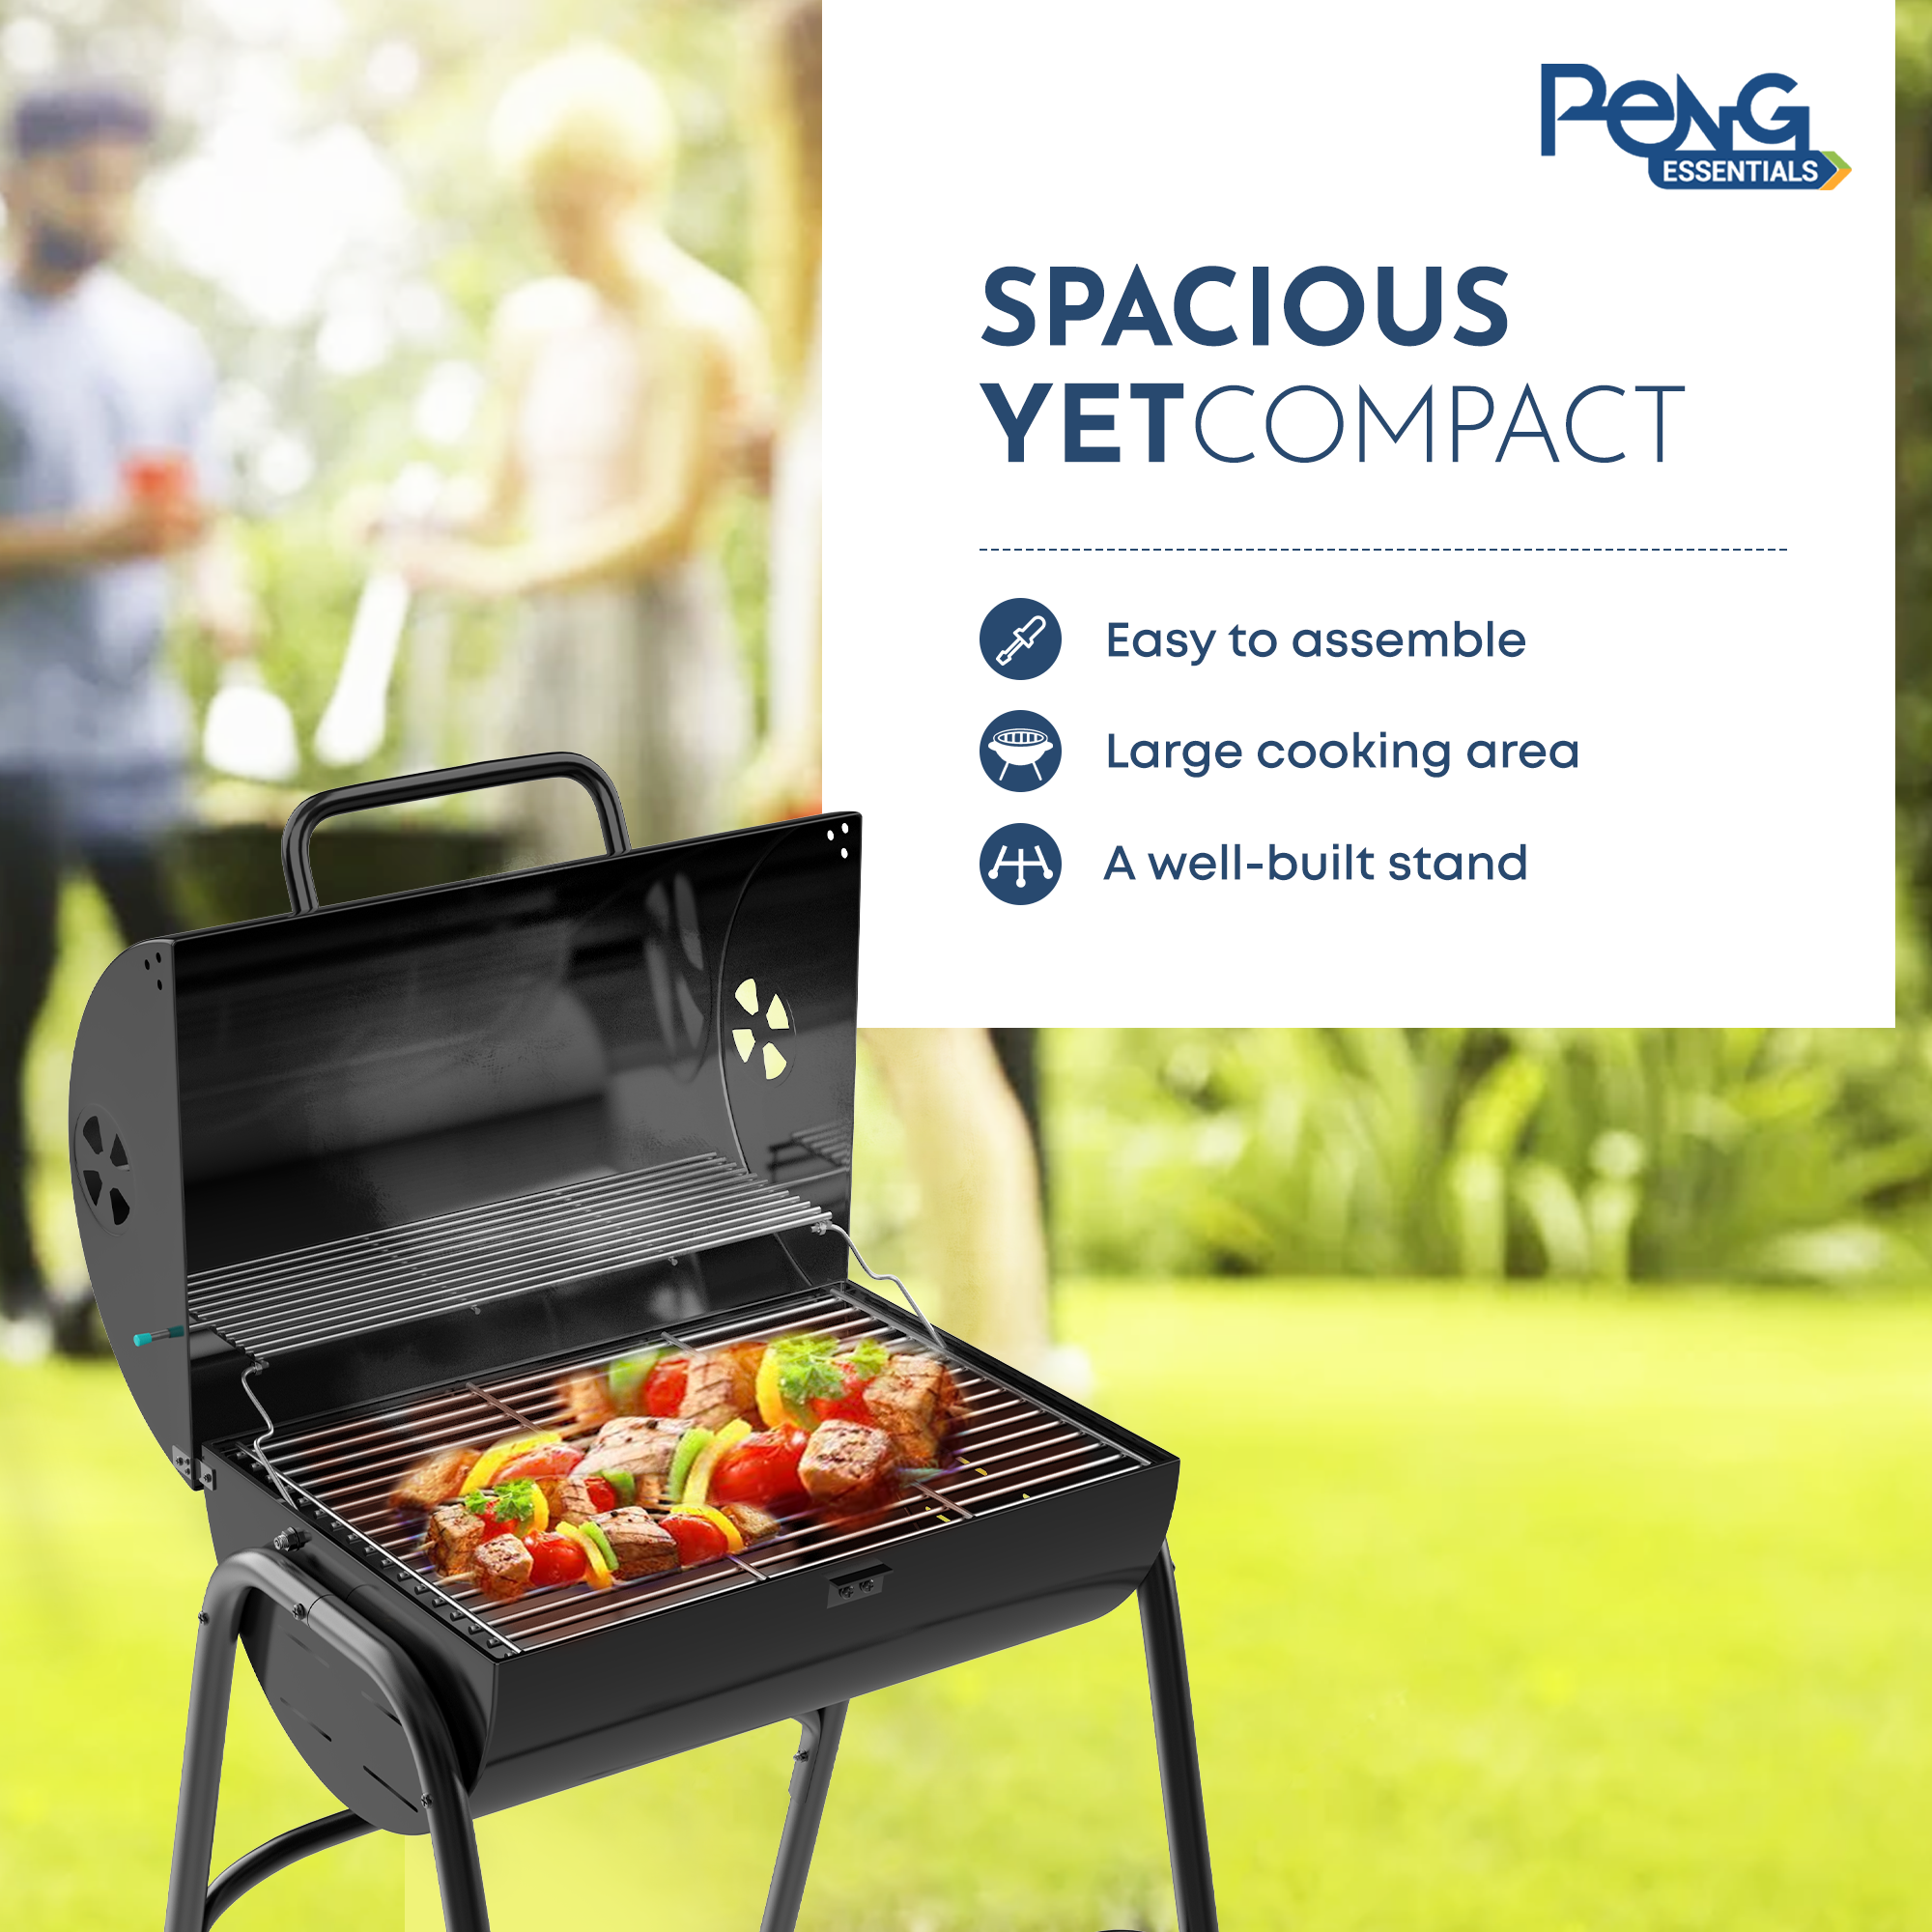 Charcoal Barbeque Grill set | Anti-Rust, Anti-Deformation & Scratch Resistant